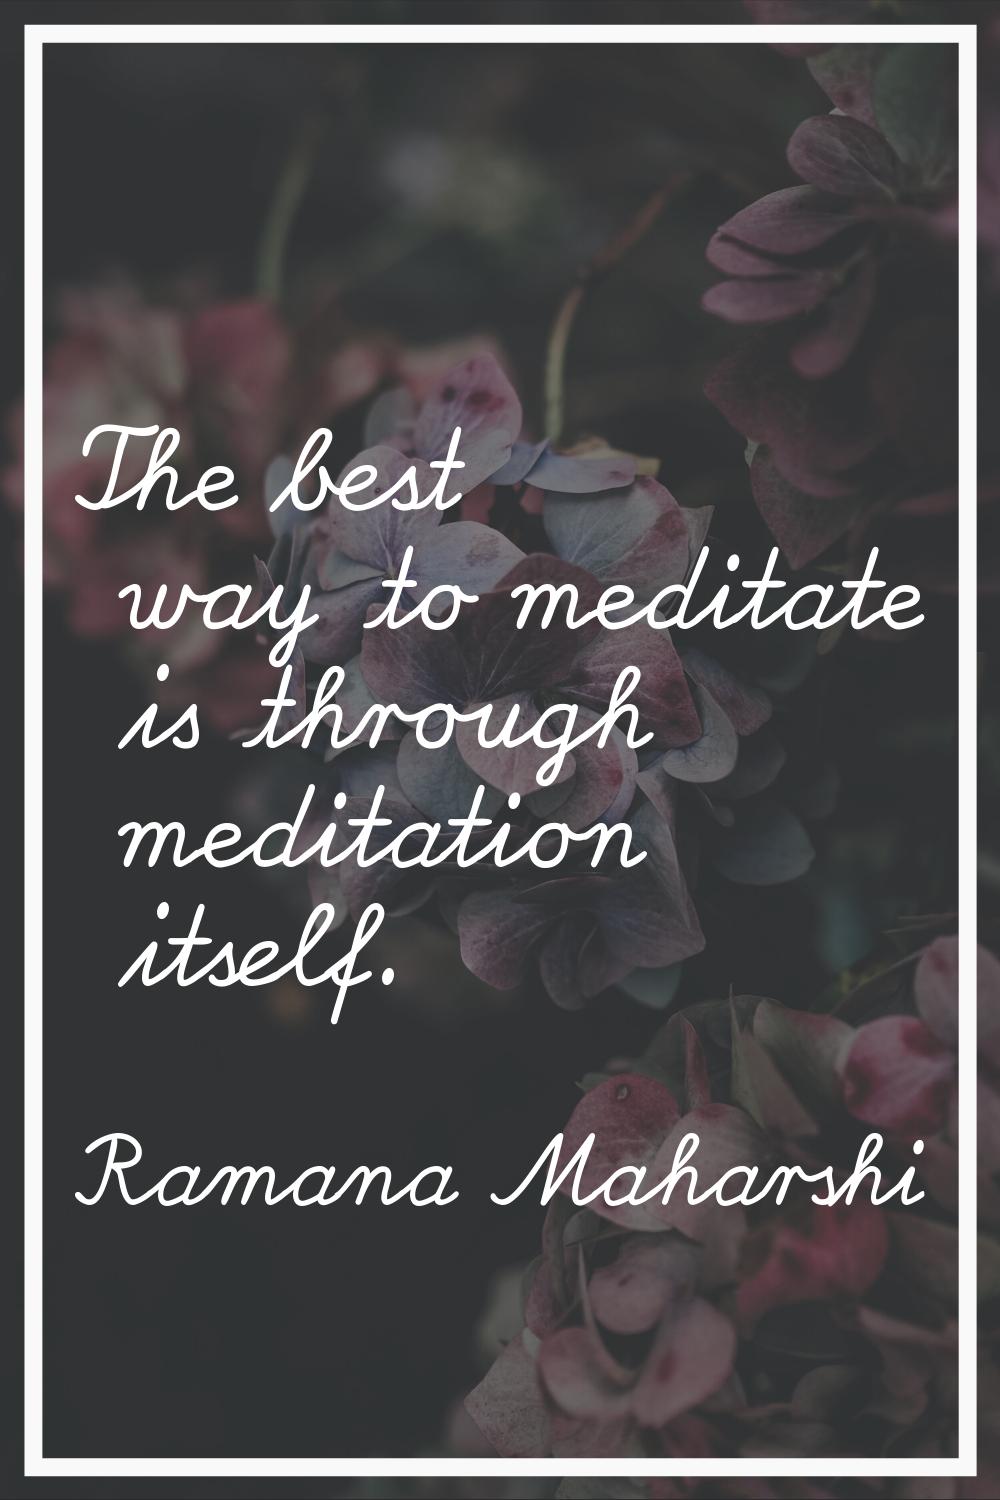 The best way to meditate is through meditation itself.